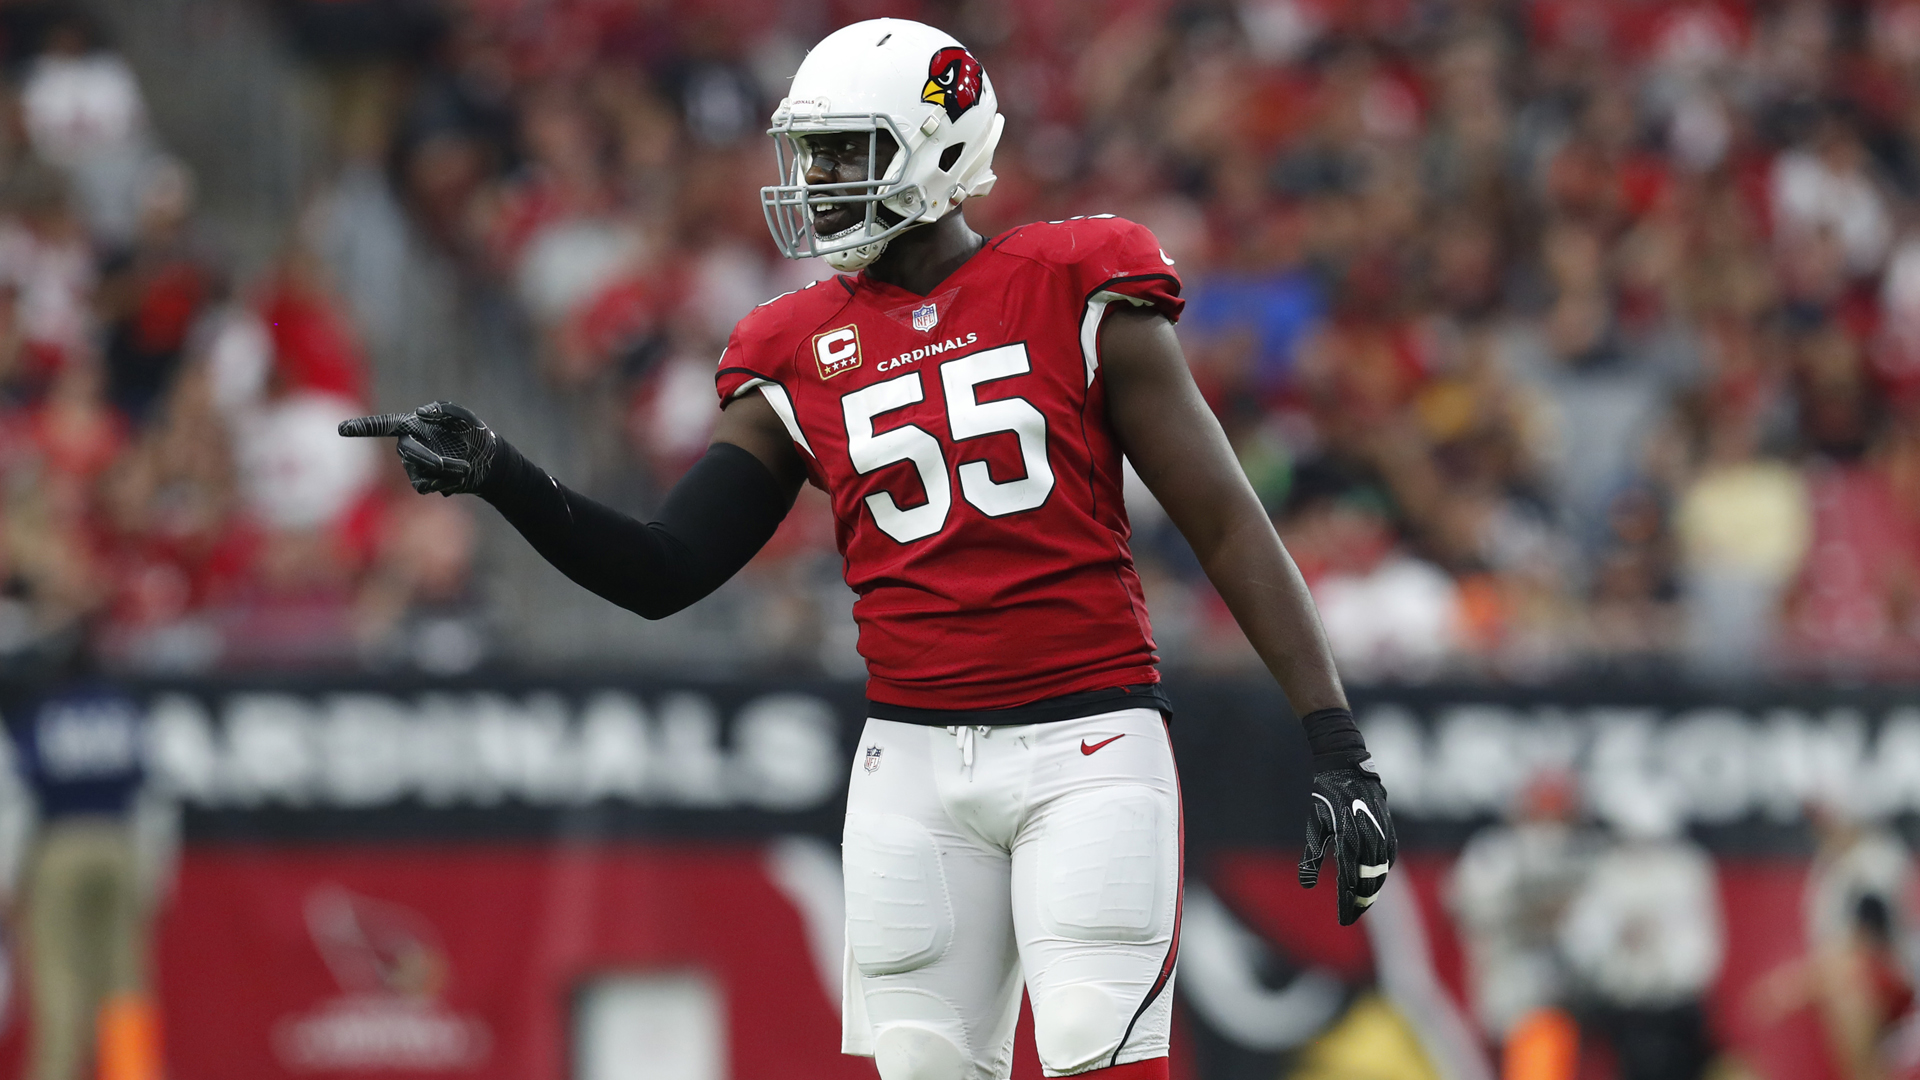 Raiders will have hands full with Chandler Jones, Cardinals' pass